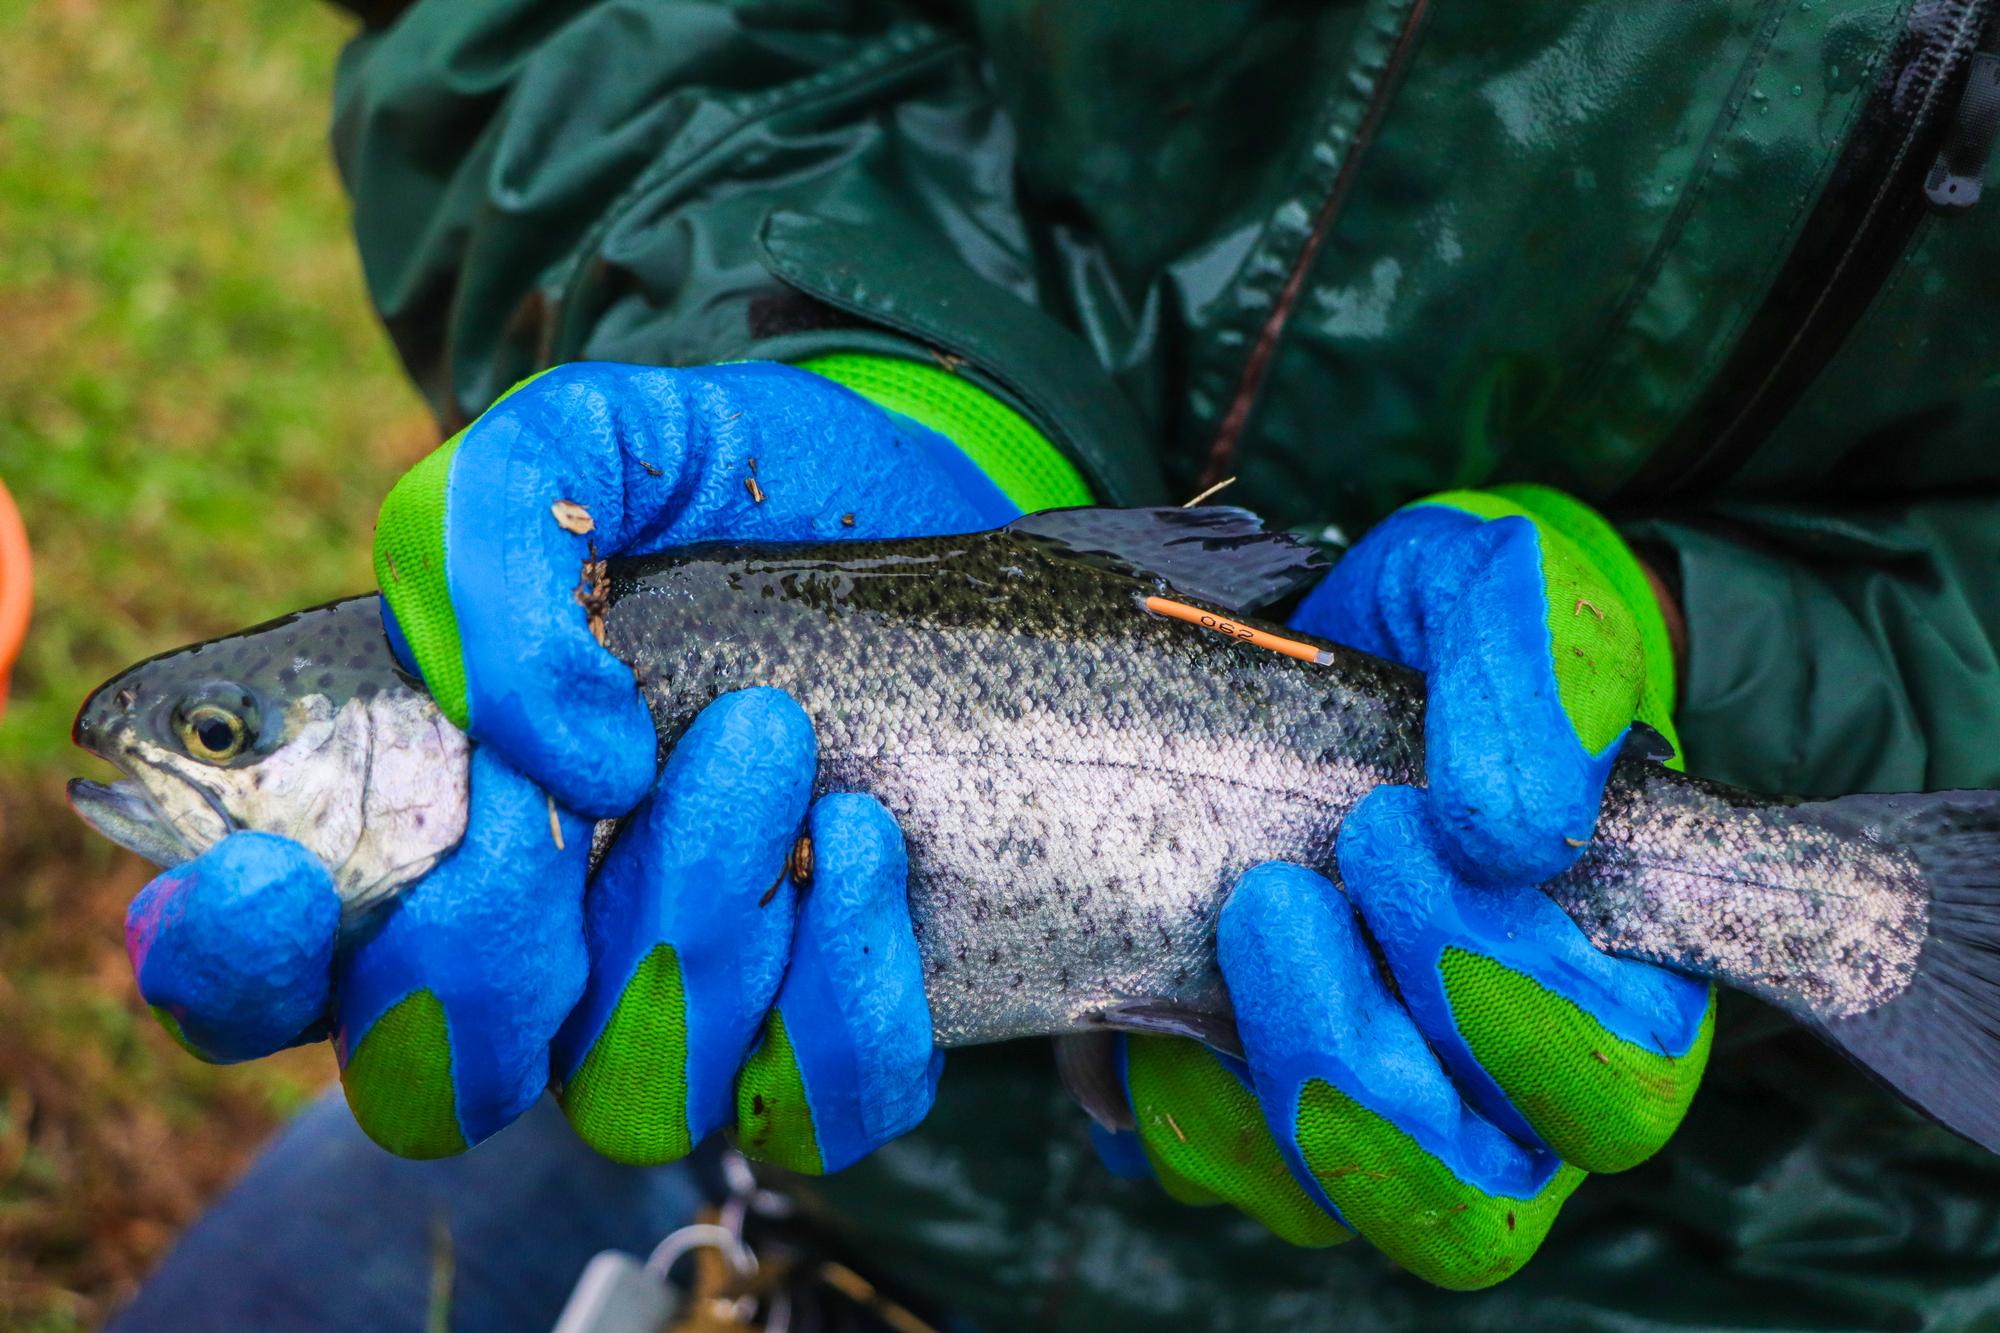 Tagged Rainbow Trout - Look for these!